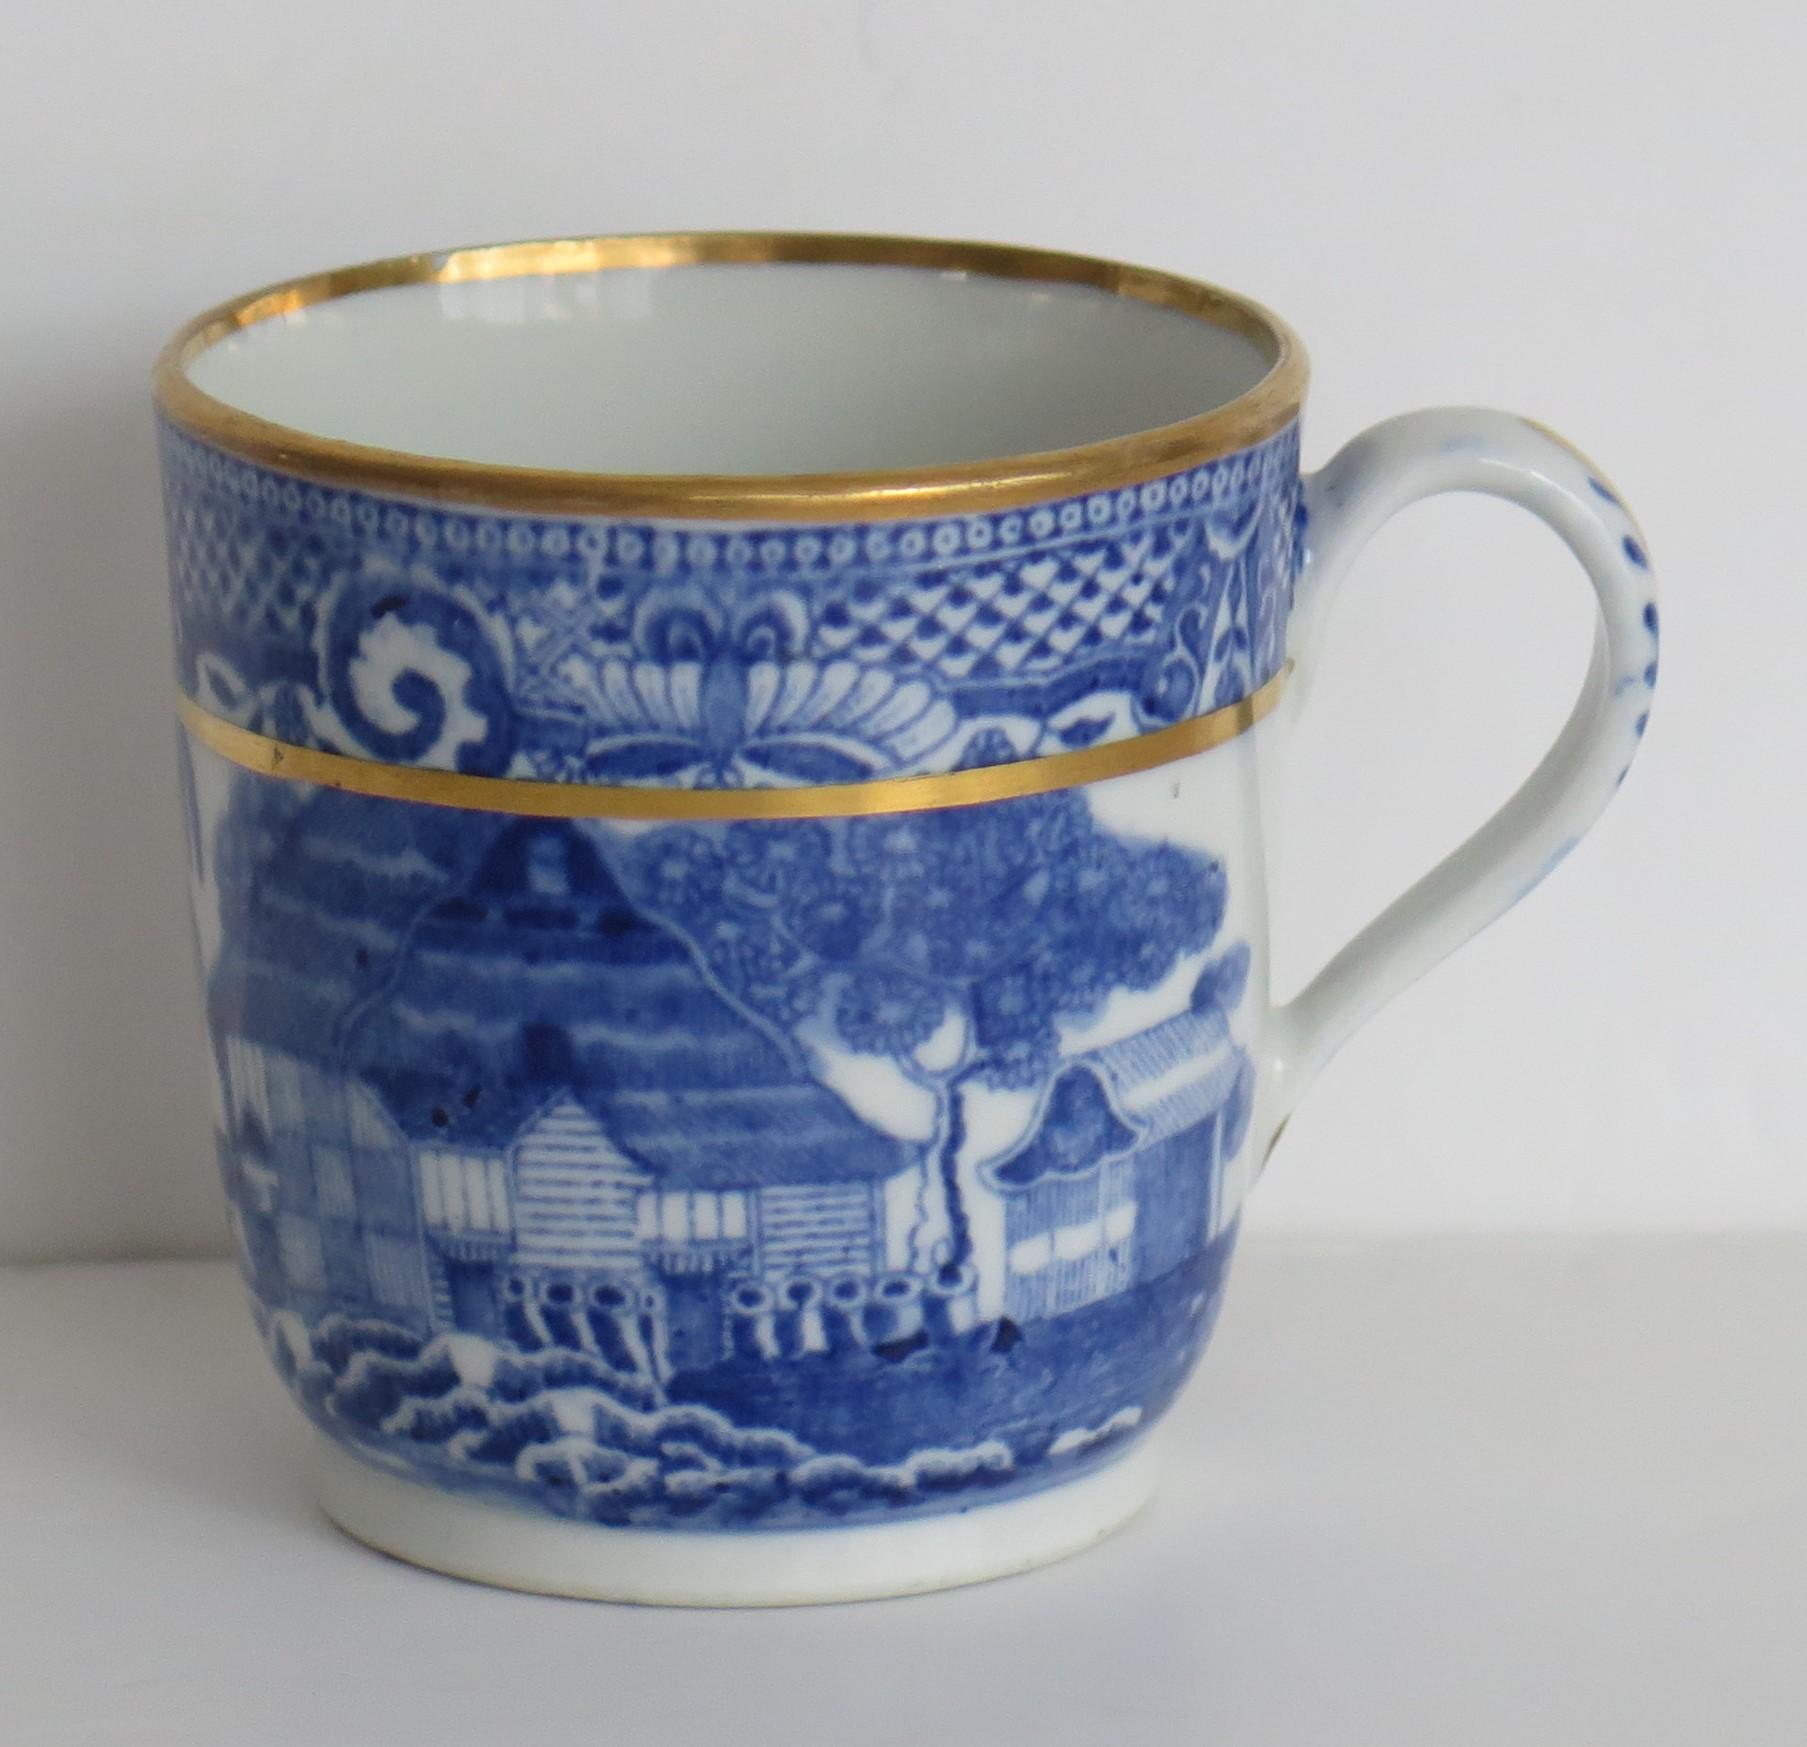 This is a porcelain blue and white, gilded Coffee Cup, attributed to New Hall, in the early 19th century George 111rd period, circa 1805-1810.

The piece is well potted on a low foot with a plain loop handle.

The cup is decorated under-glaze